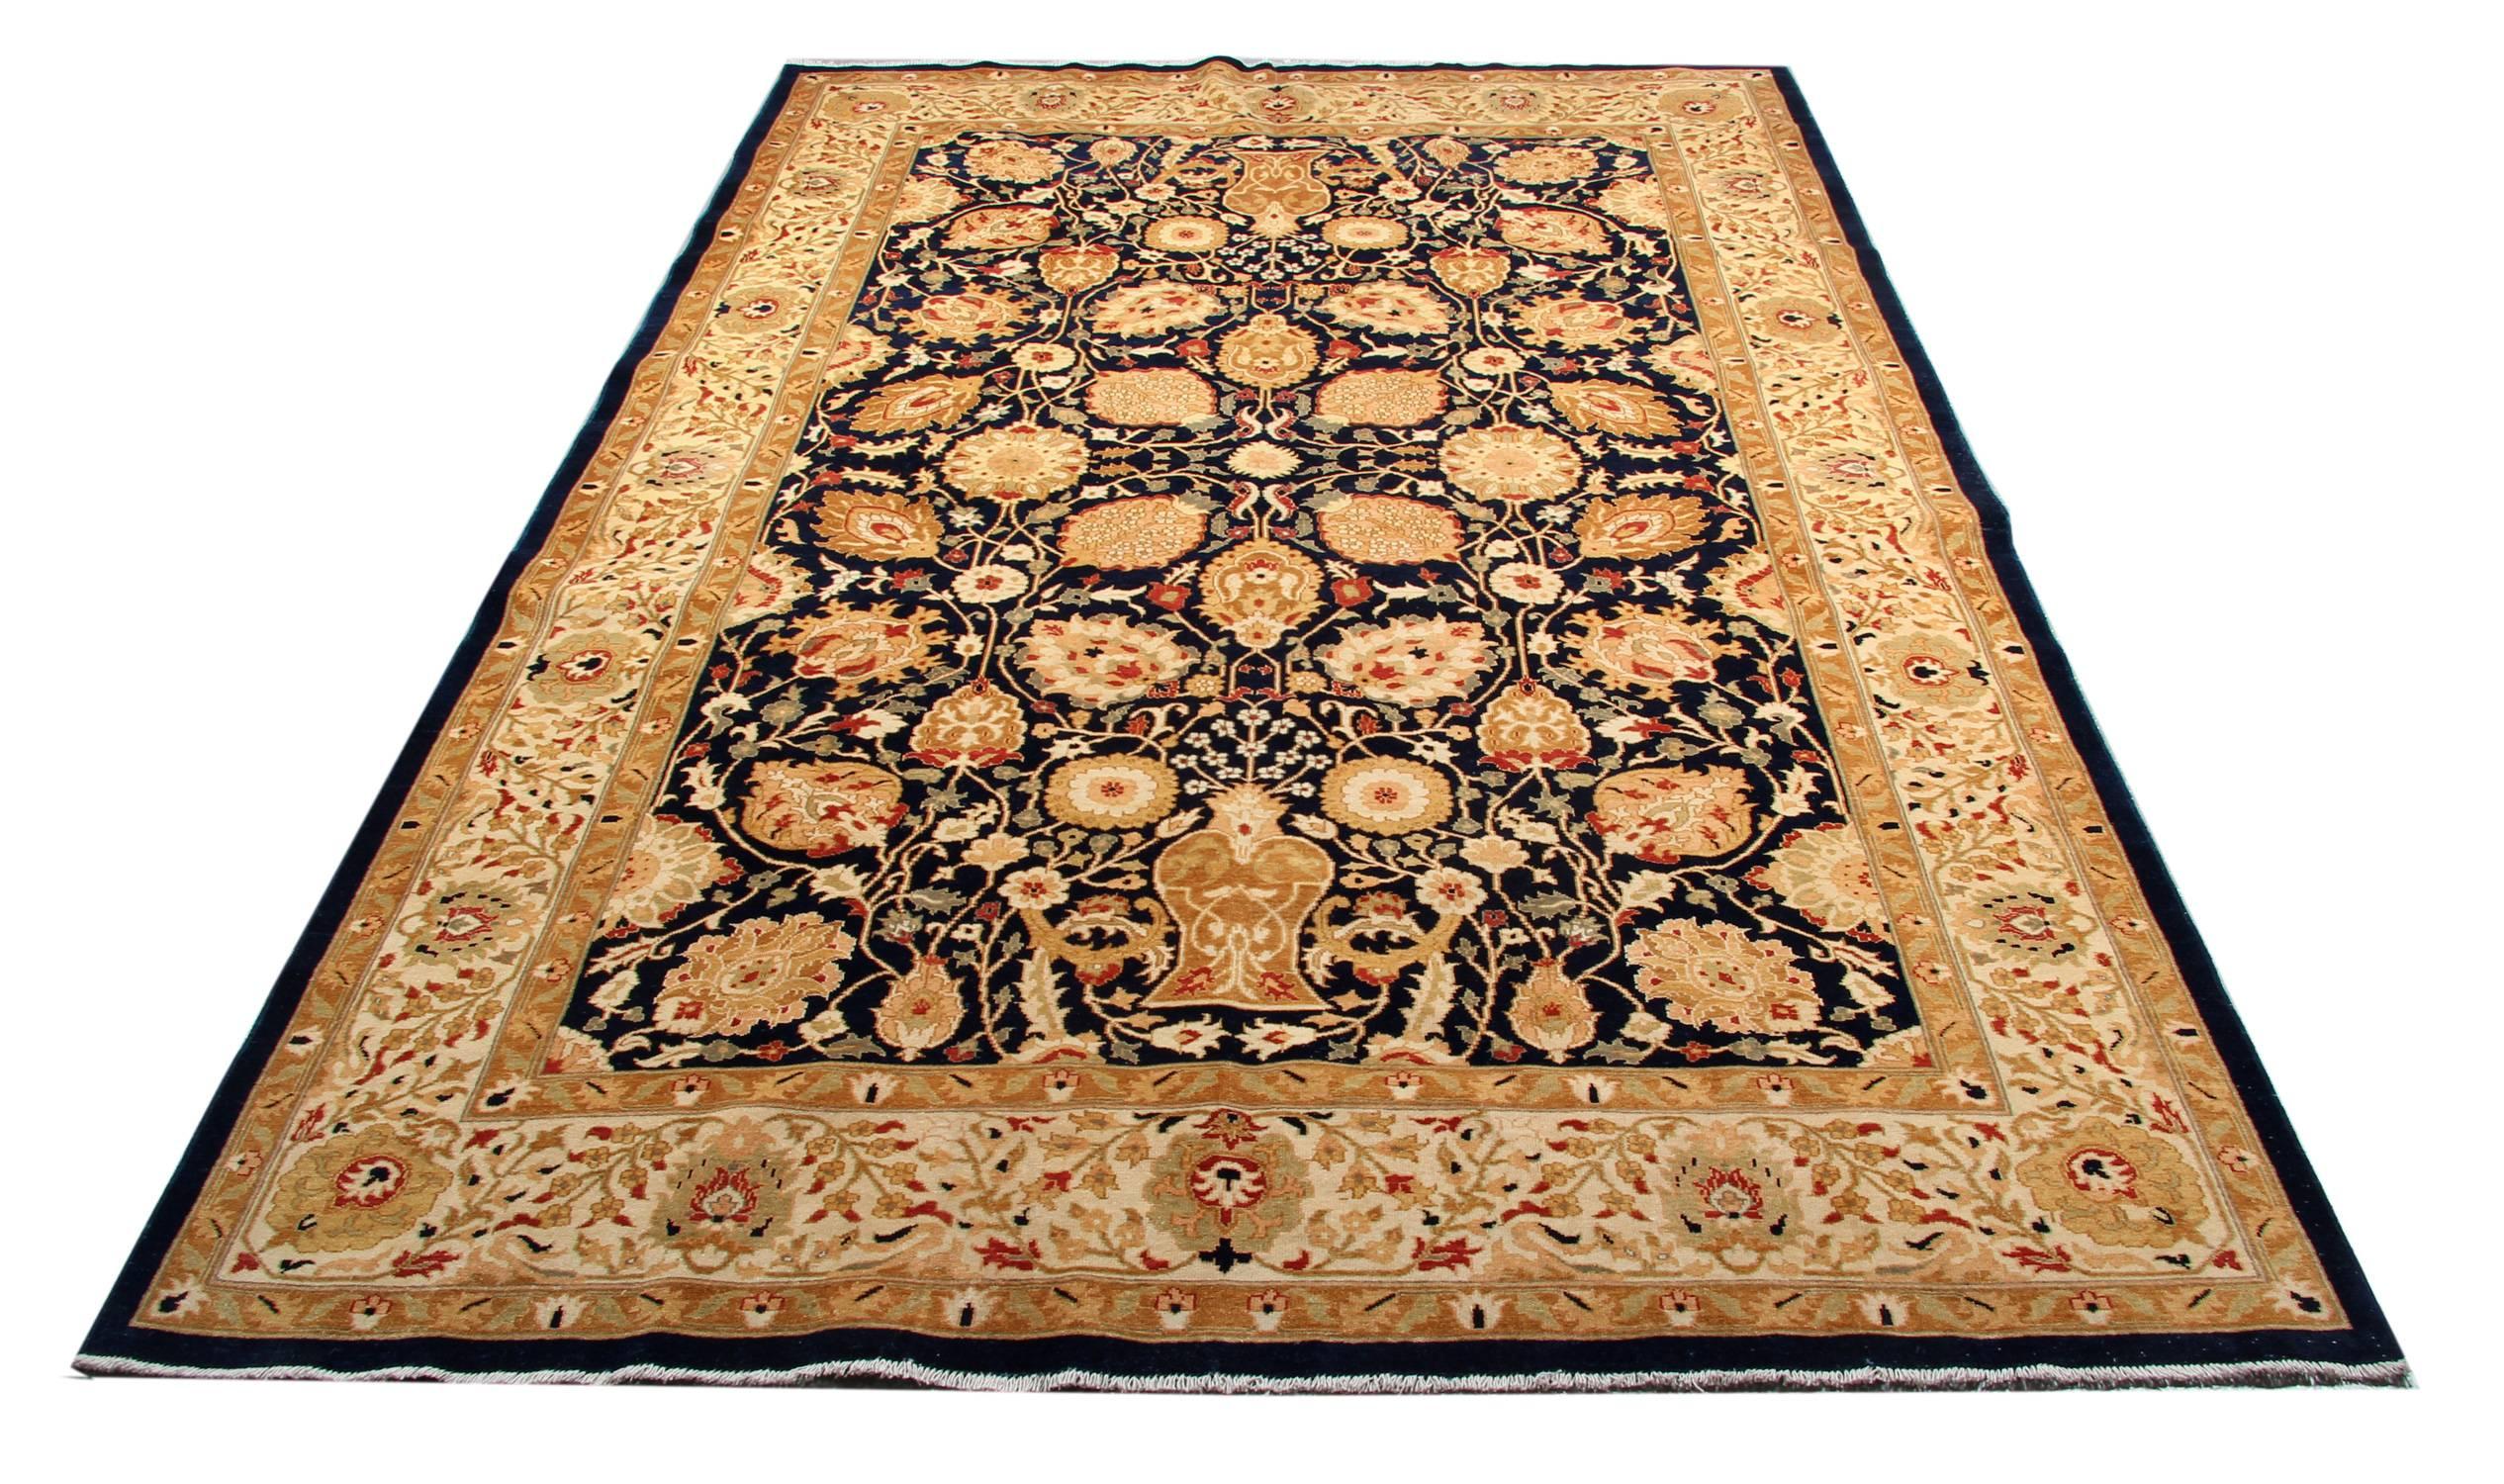 This handmade carpet gold oriental rug is a Ziegler Style Sultanabad woven rug made on our looms by our master weavers in Afghanistan. This Floral Patterned rugs kind of our luxury rugs made of own looms by our master weavers of Afghan rugs, This